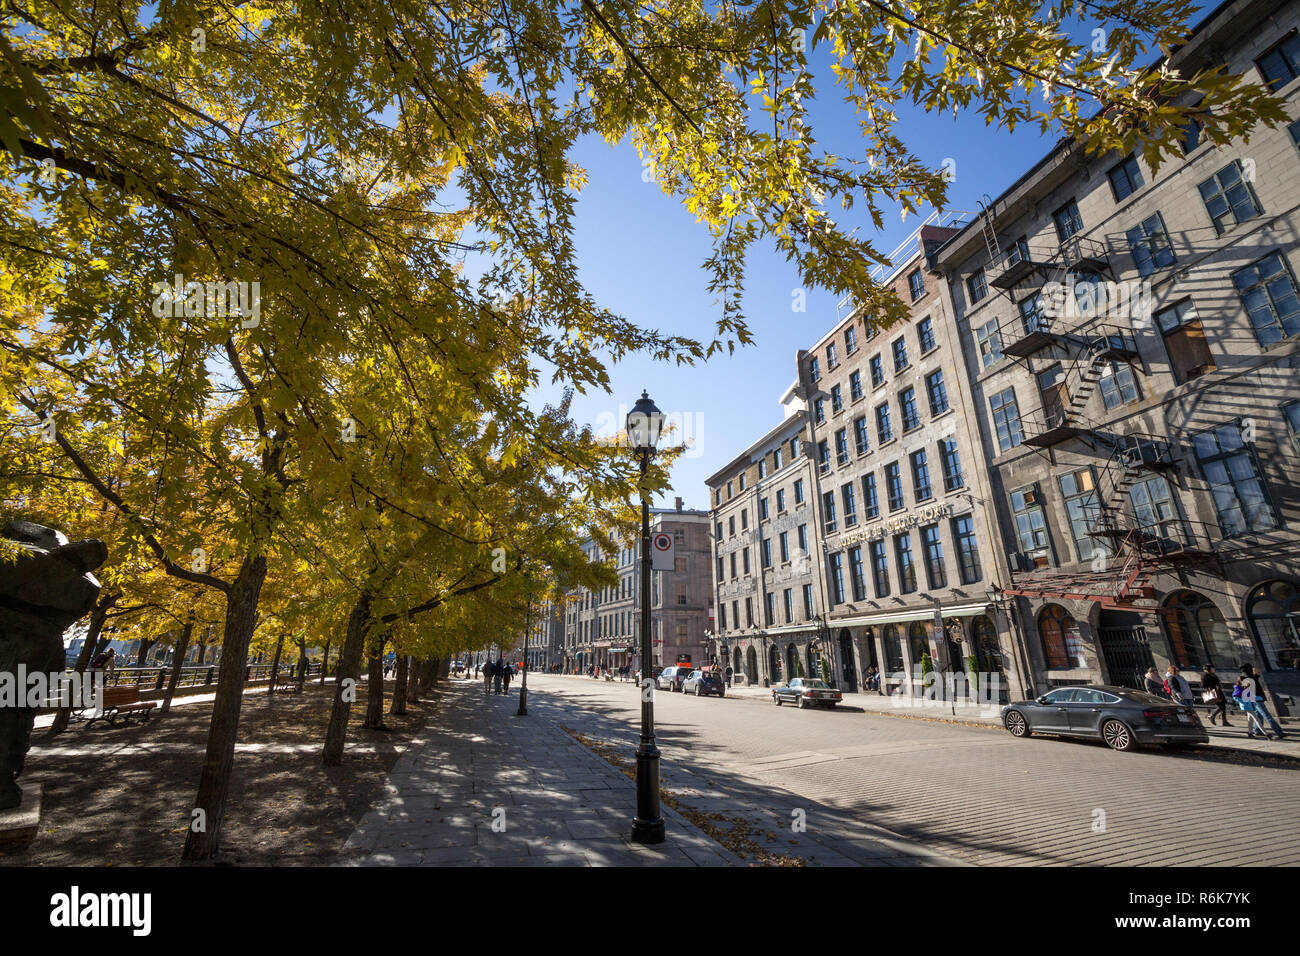 MONTREAL, CANADA - NOVEMBER 4, 2018: View of Old Montreal seafront, or Vieux Montreal, Quebec, in the autumn, with its yello leaves trees and stone bu Stock Photo